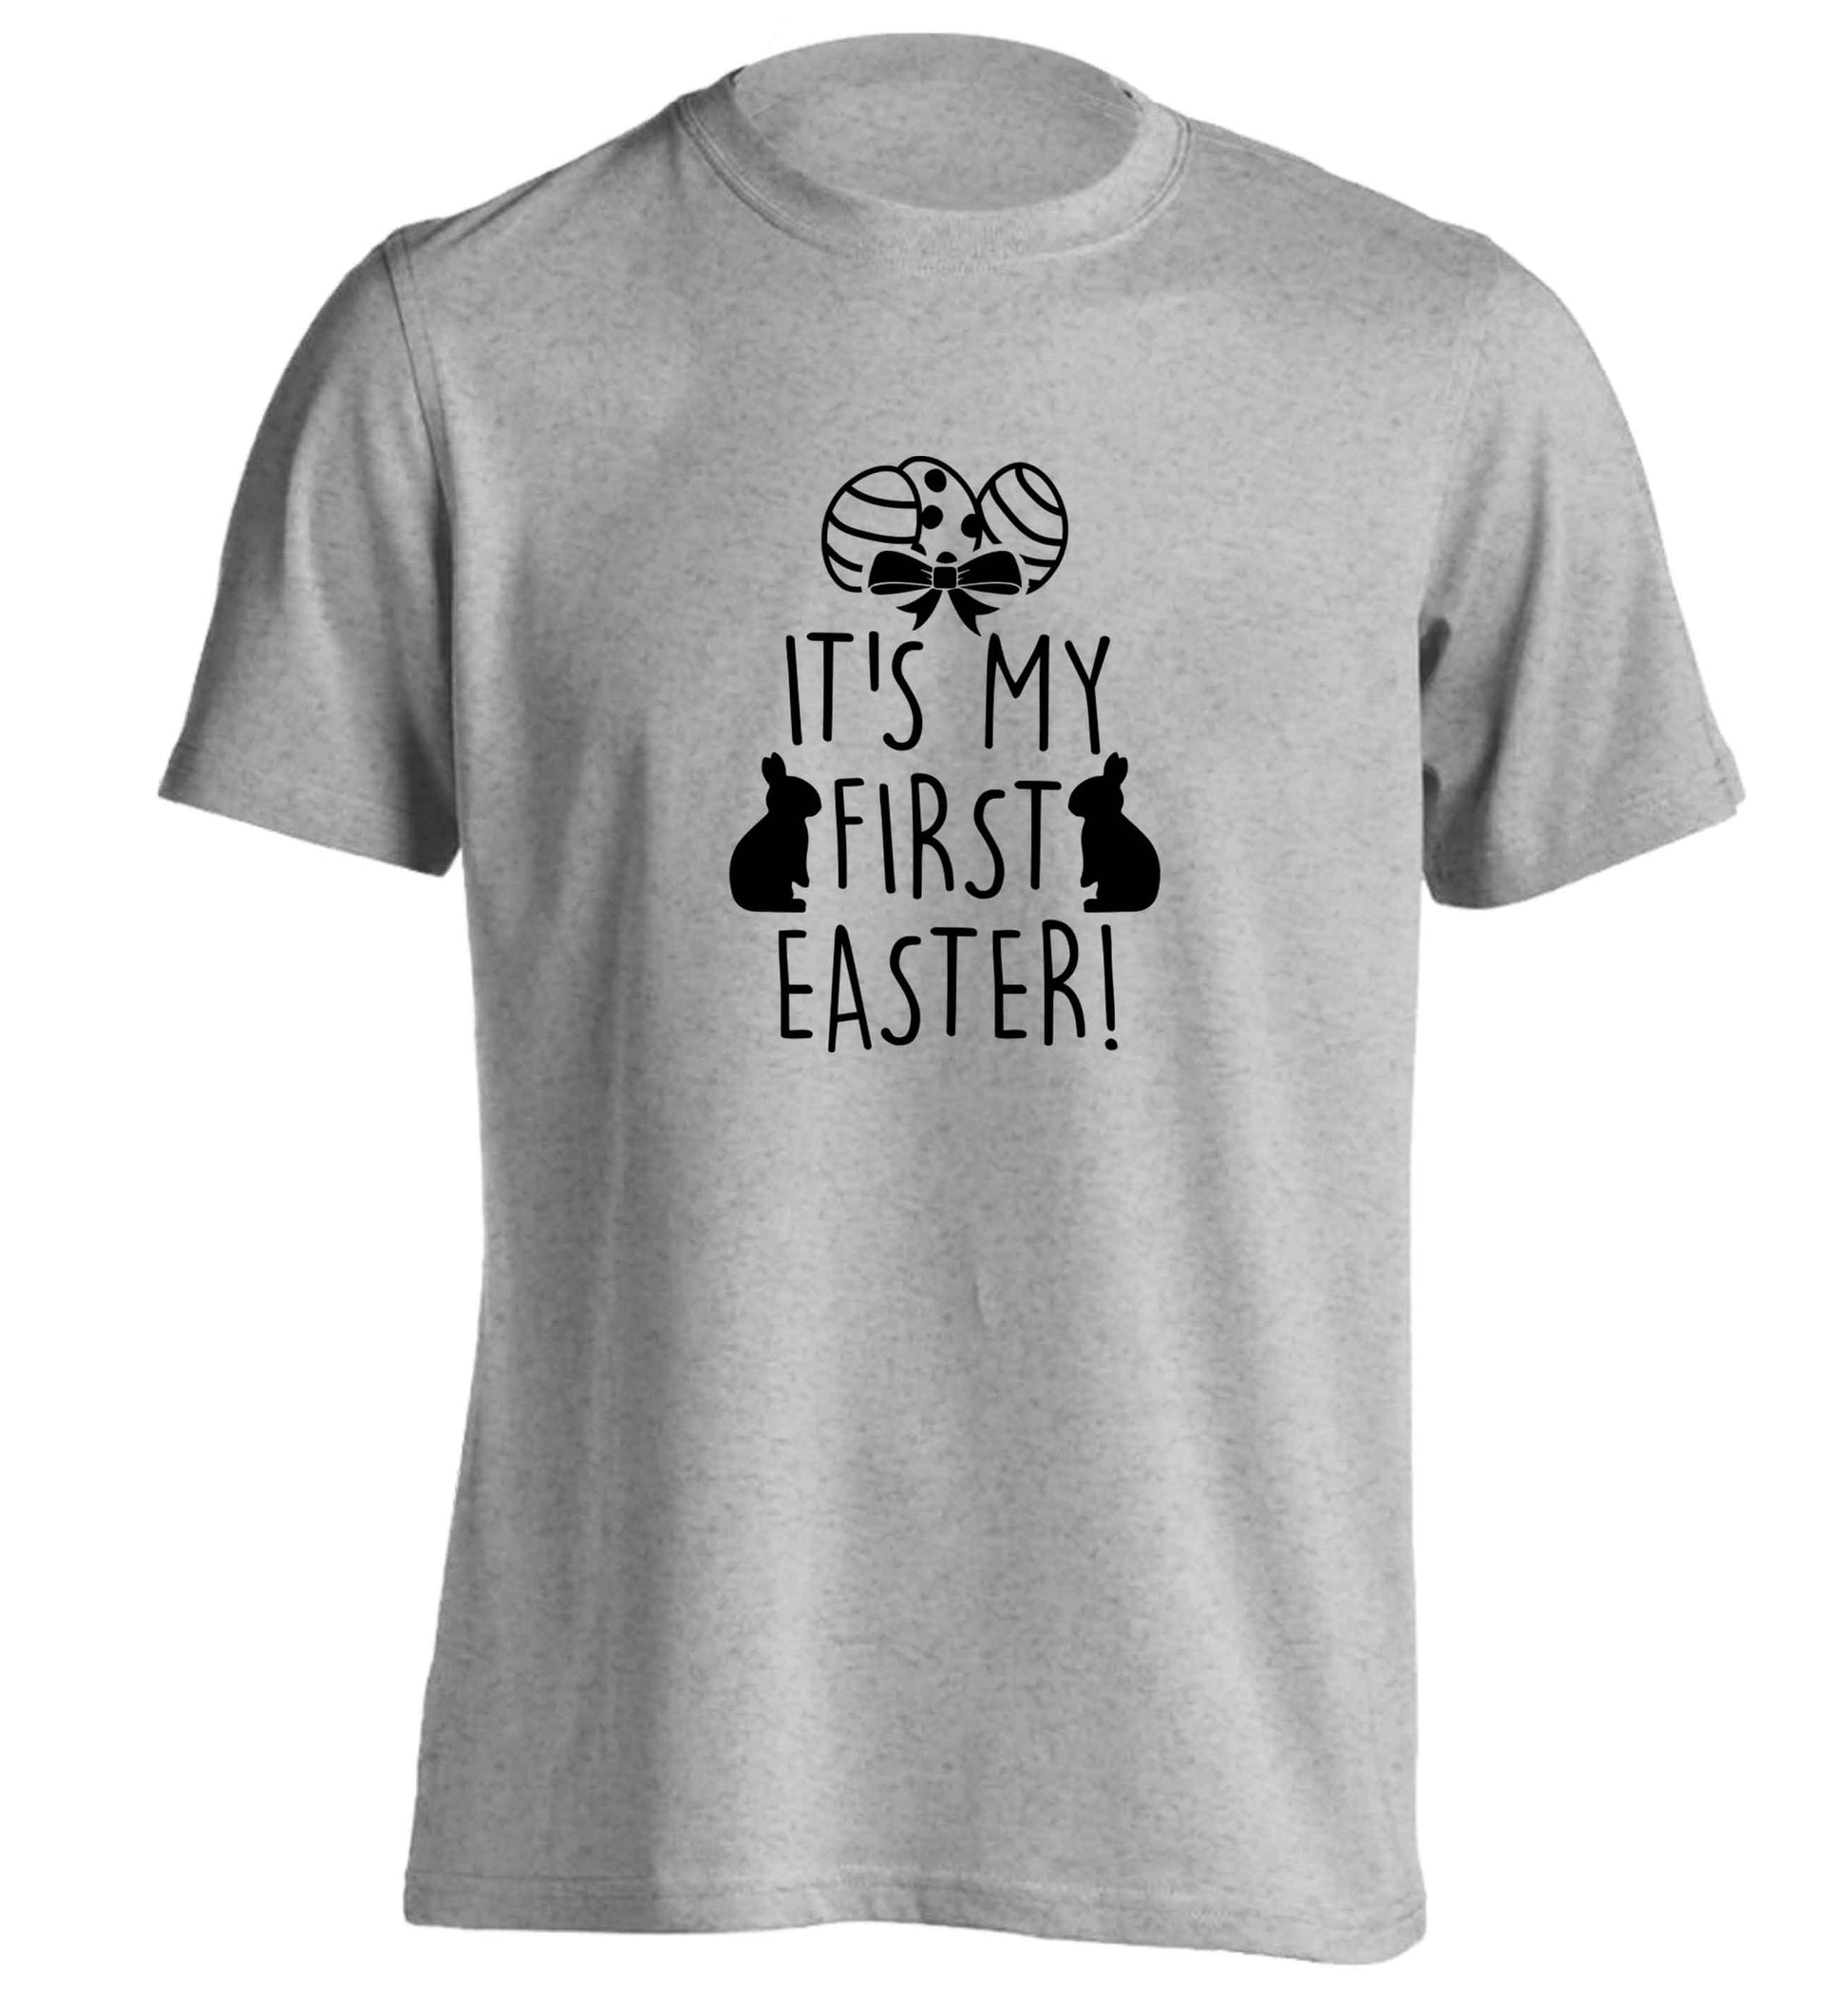 It's my first Easter adults unisex grey Tshirt 2XL